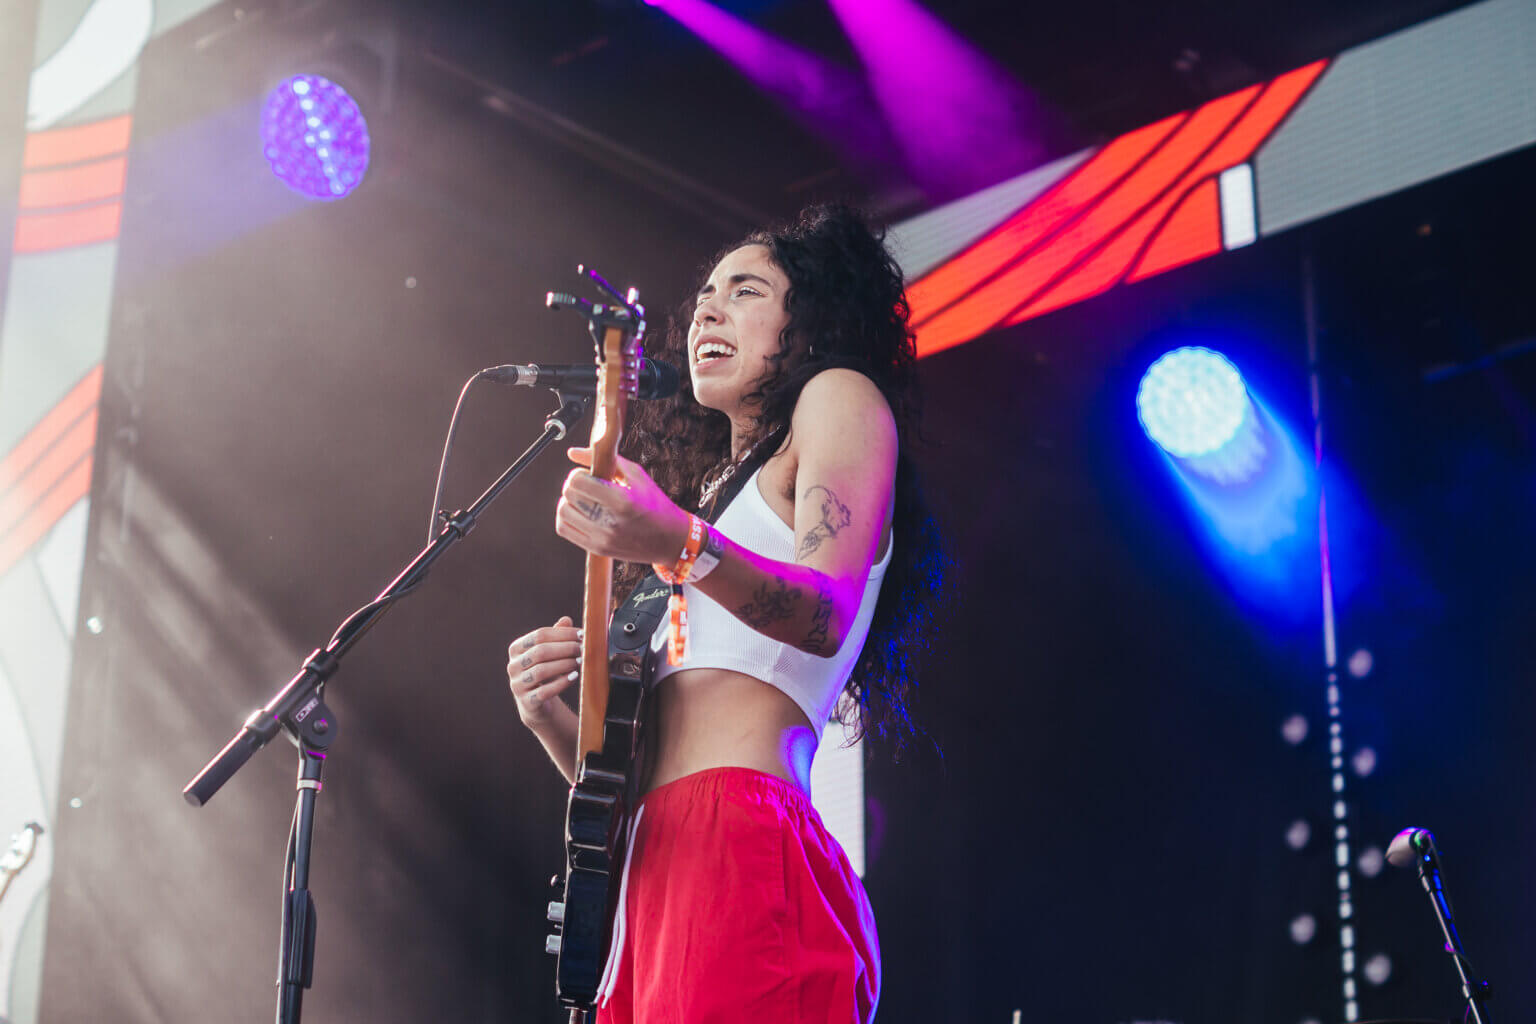 Treefort Festival 2022 Day 2 and 3 recap by Leslie Chu. Highlights include sets by Vanishing Twin, Indigo De Souza, Genesis Owusu and more